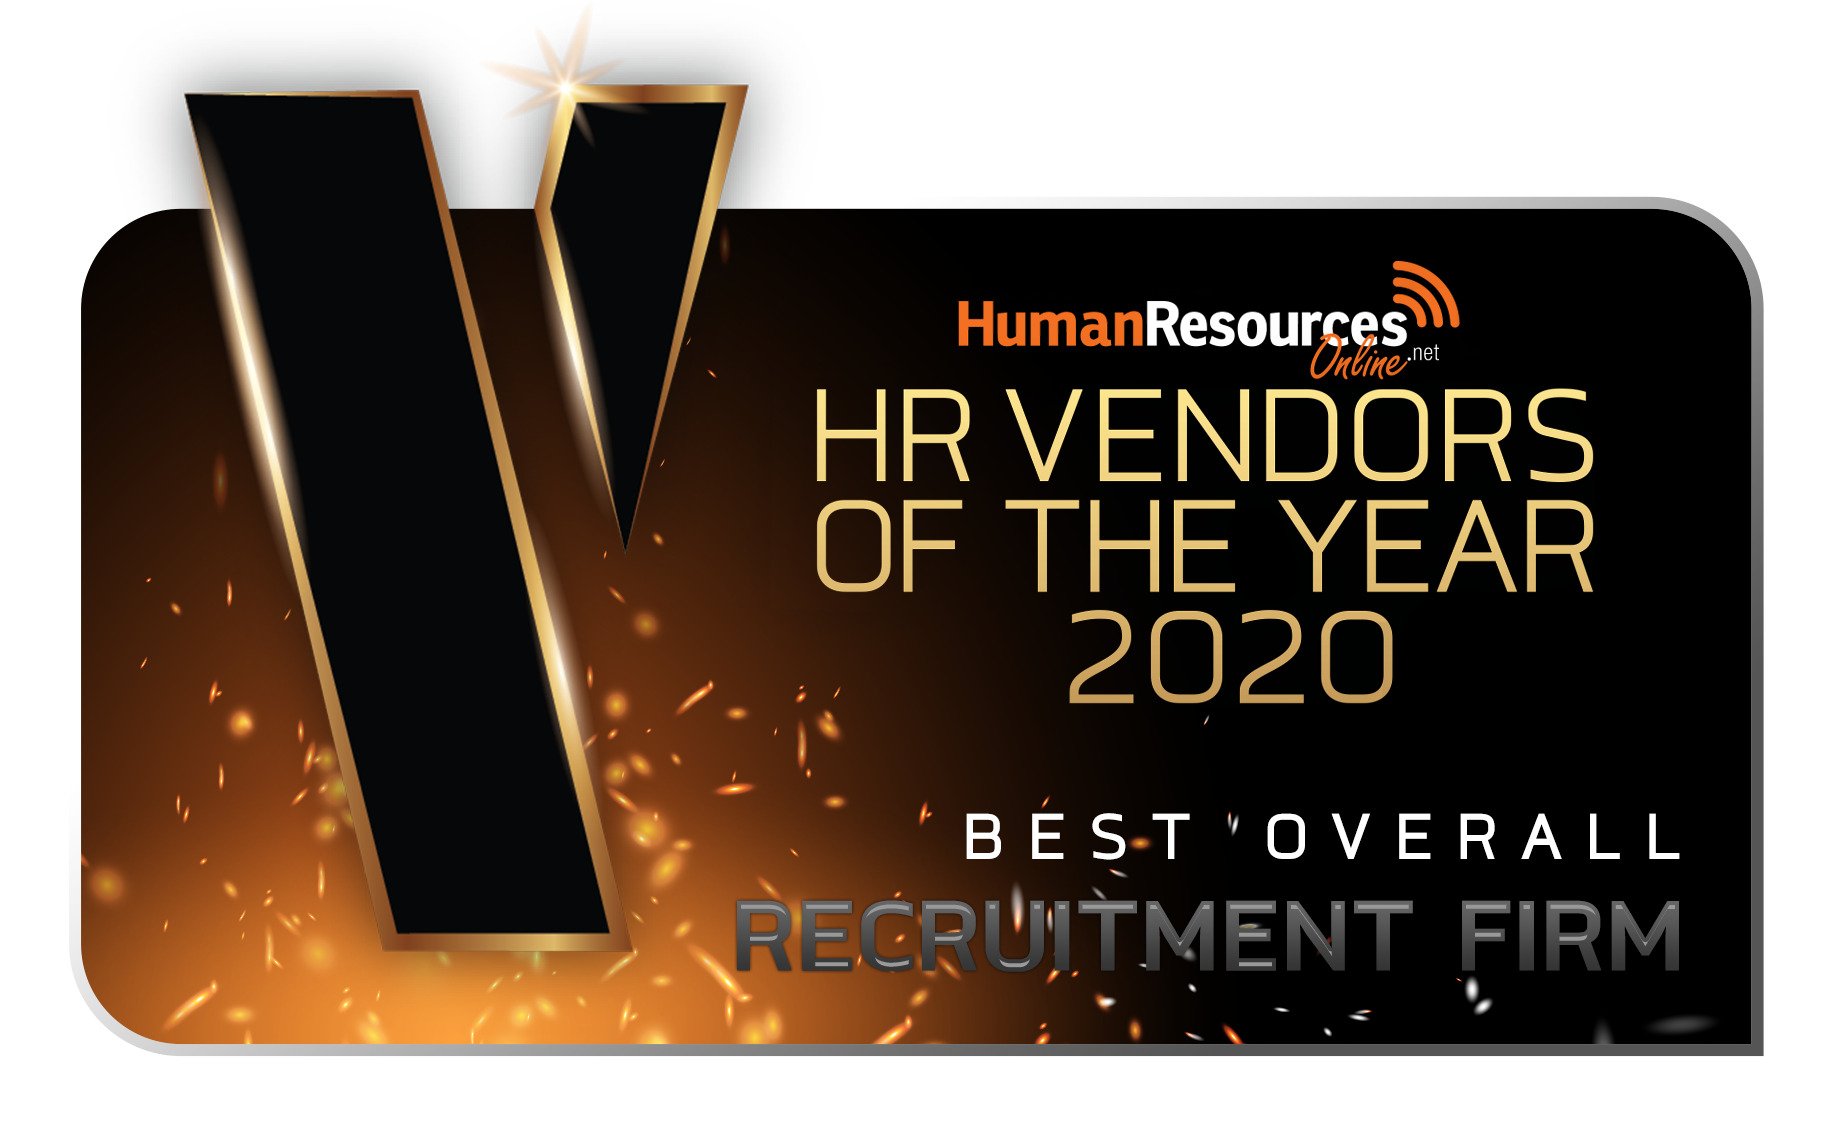 HR Vendors of the Year 2020